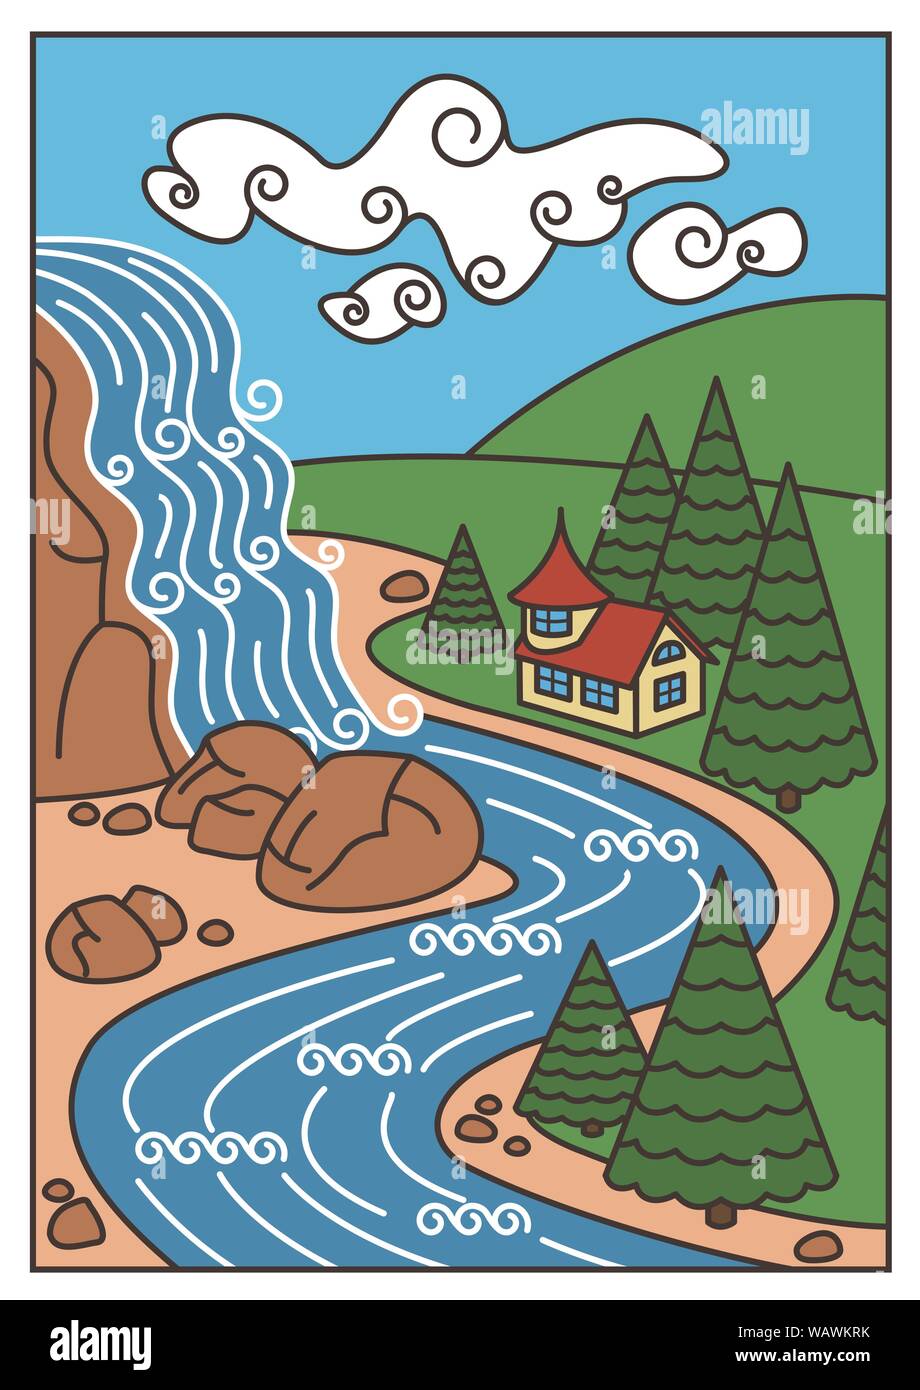 Illustration of Nature Landscape - Waterfall, River, Mountains and the beautiful house. Vector Card. EPS10 Stock Vector